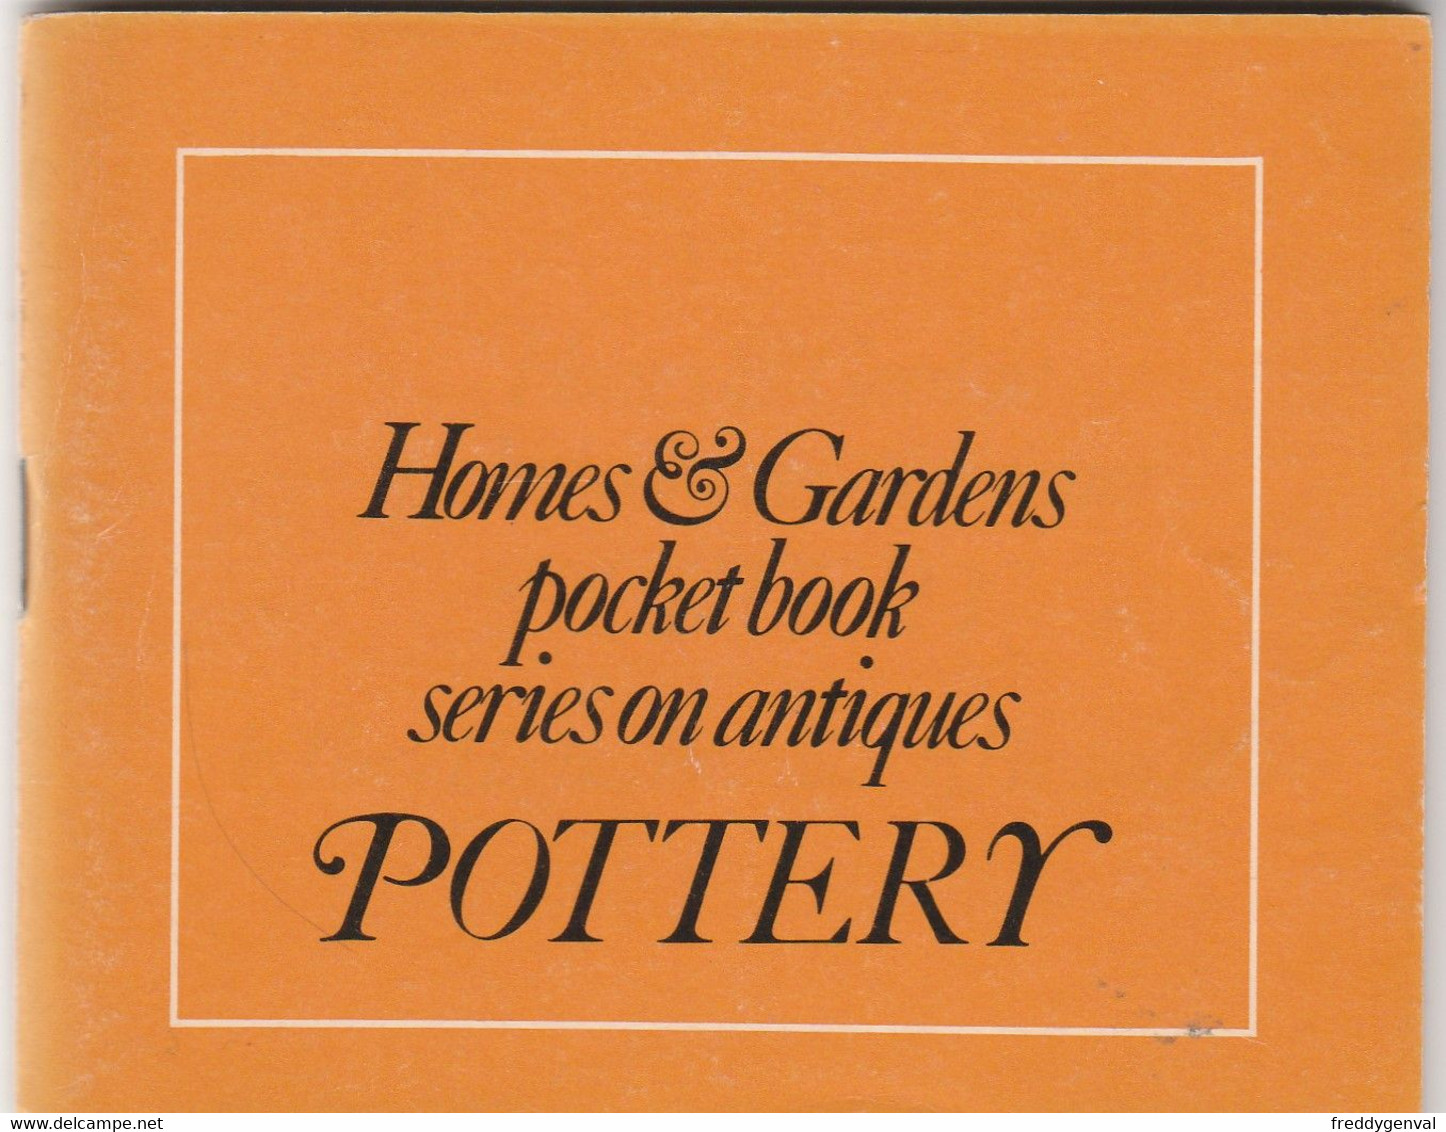 HOMES AND GARDENS POCKET BOOK SERIES ON ANTIQUES POTTERY - Cultural